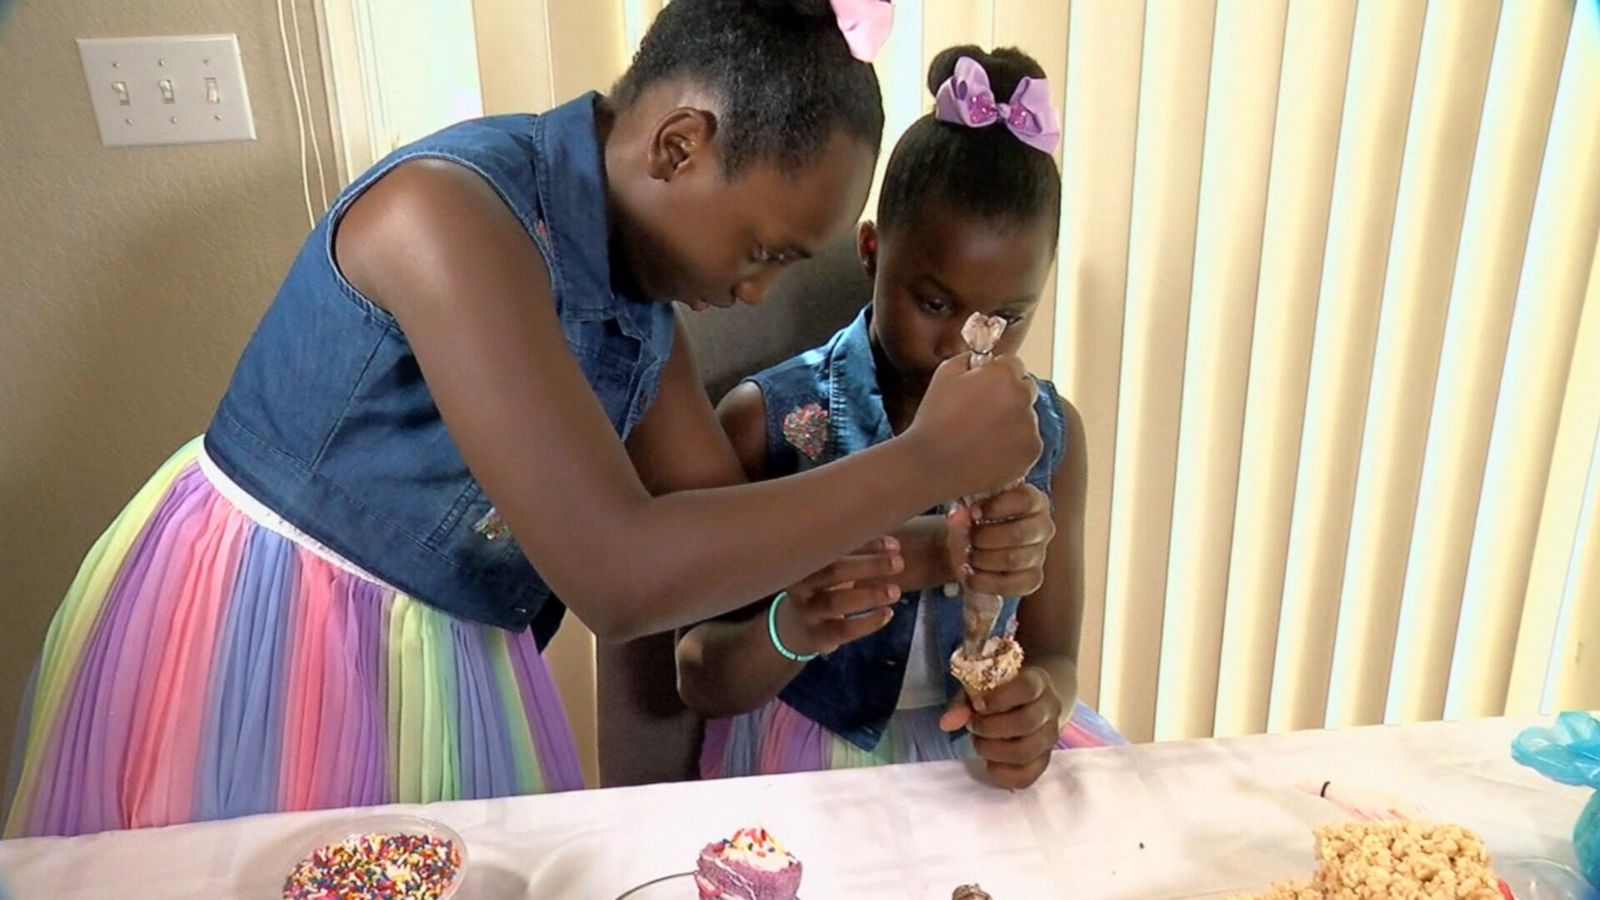 Sisters Given Sweet Surprise From Local Entrepreneurs To Help Jumpstart Baking Business Abc News